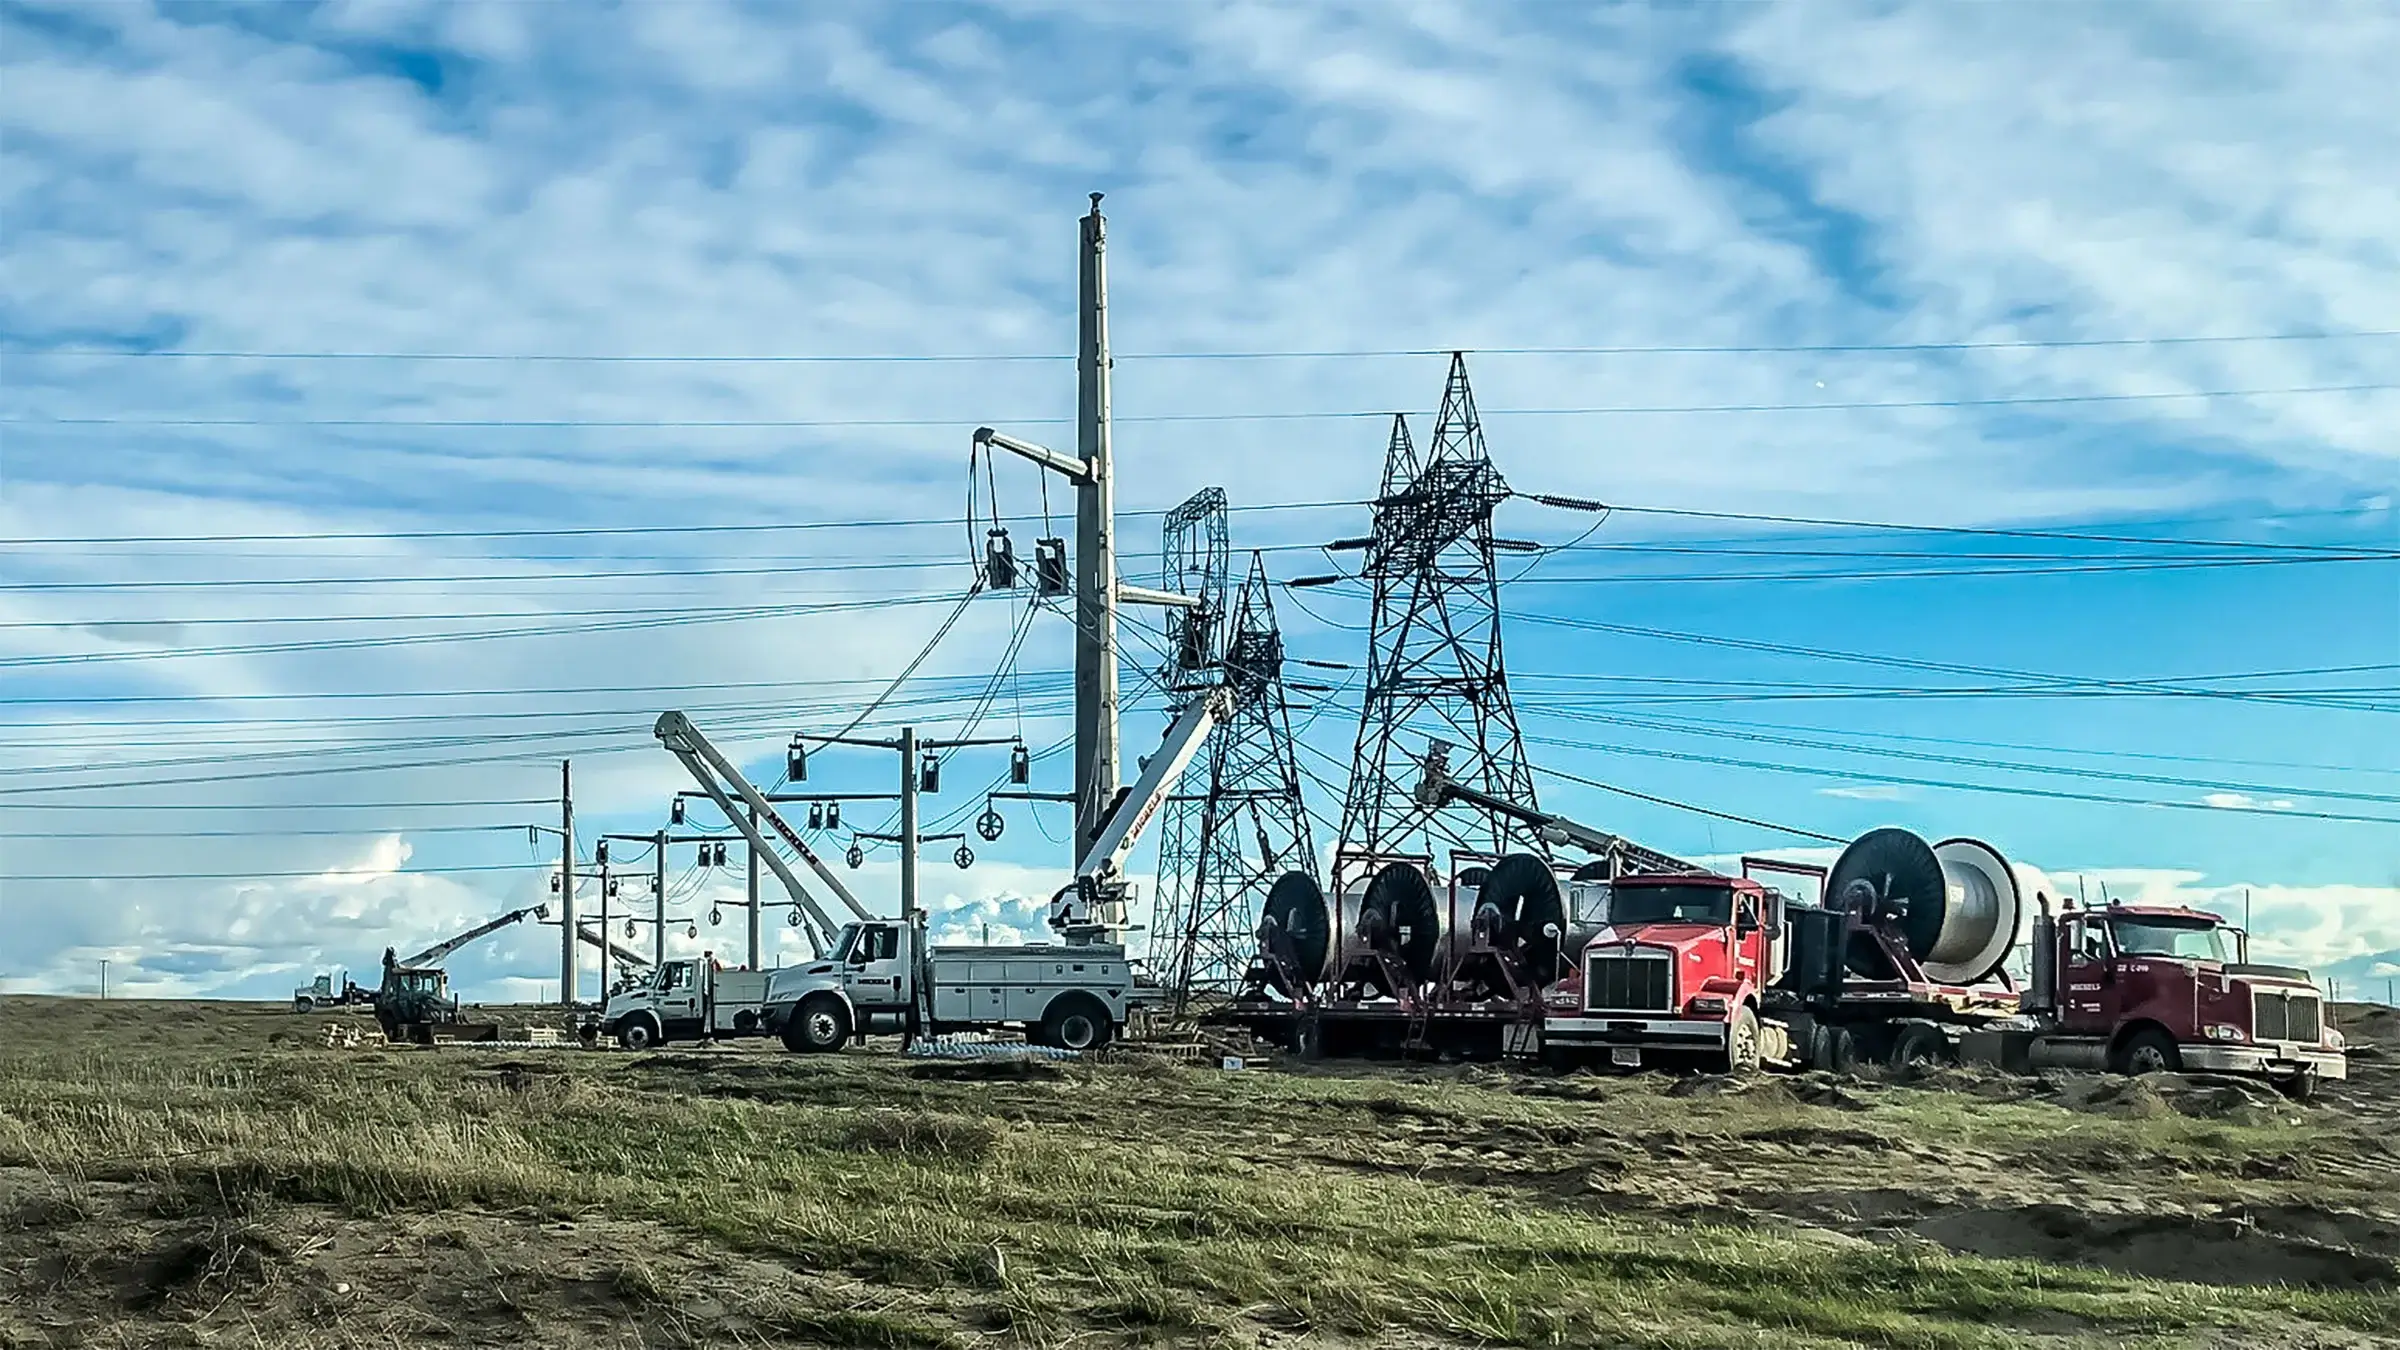 Electrical line workers connect power lines to a tower against a blue sky